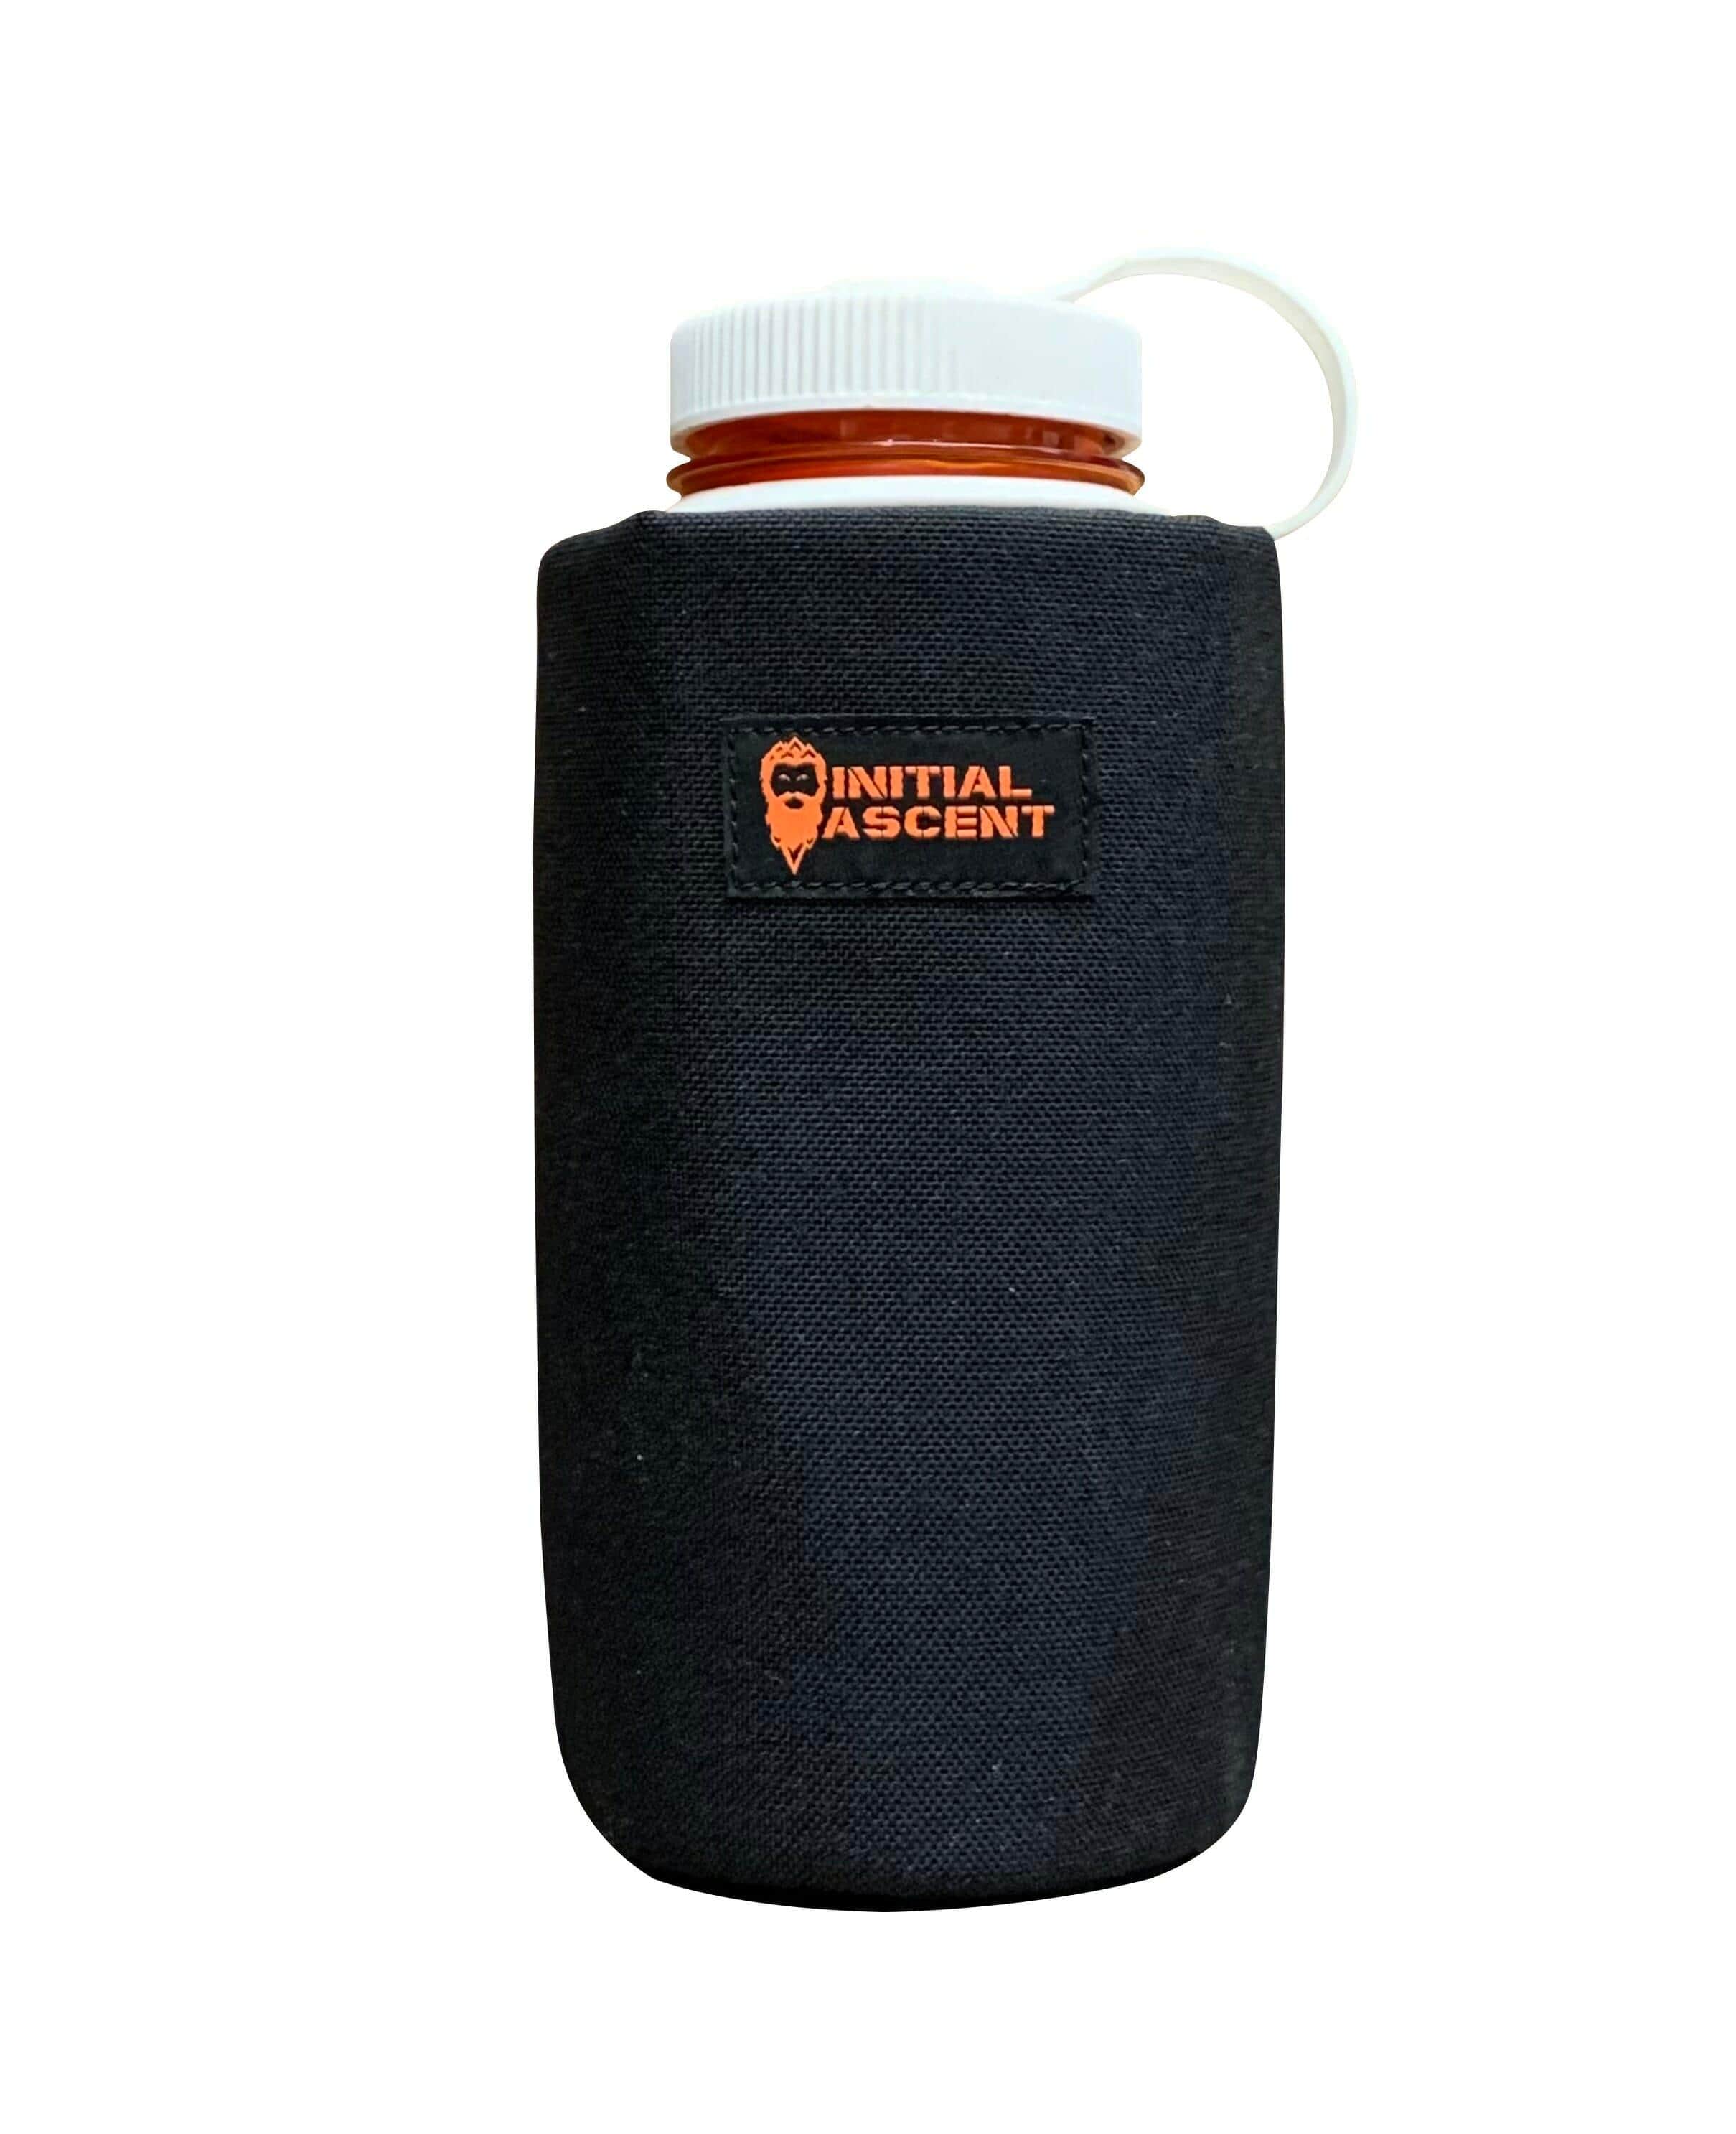 IA Bottle Holder – Initial Ascent